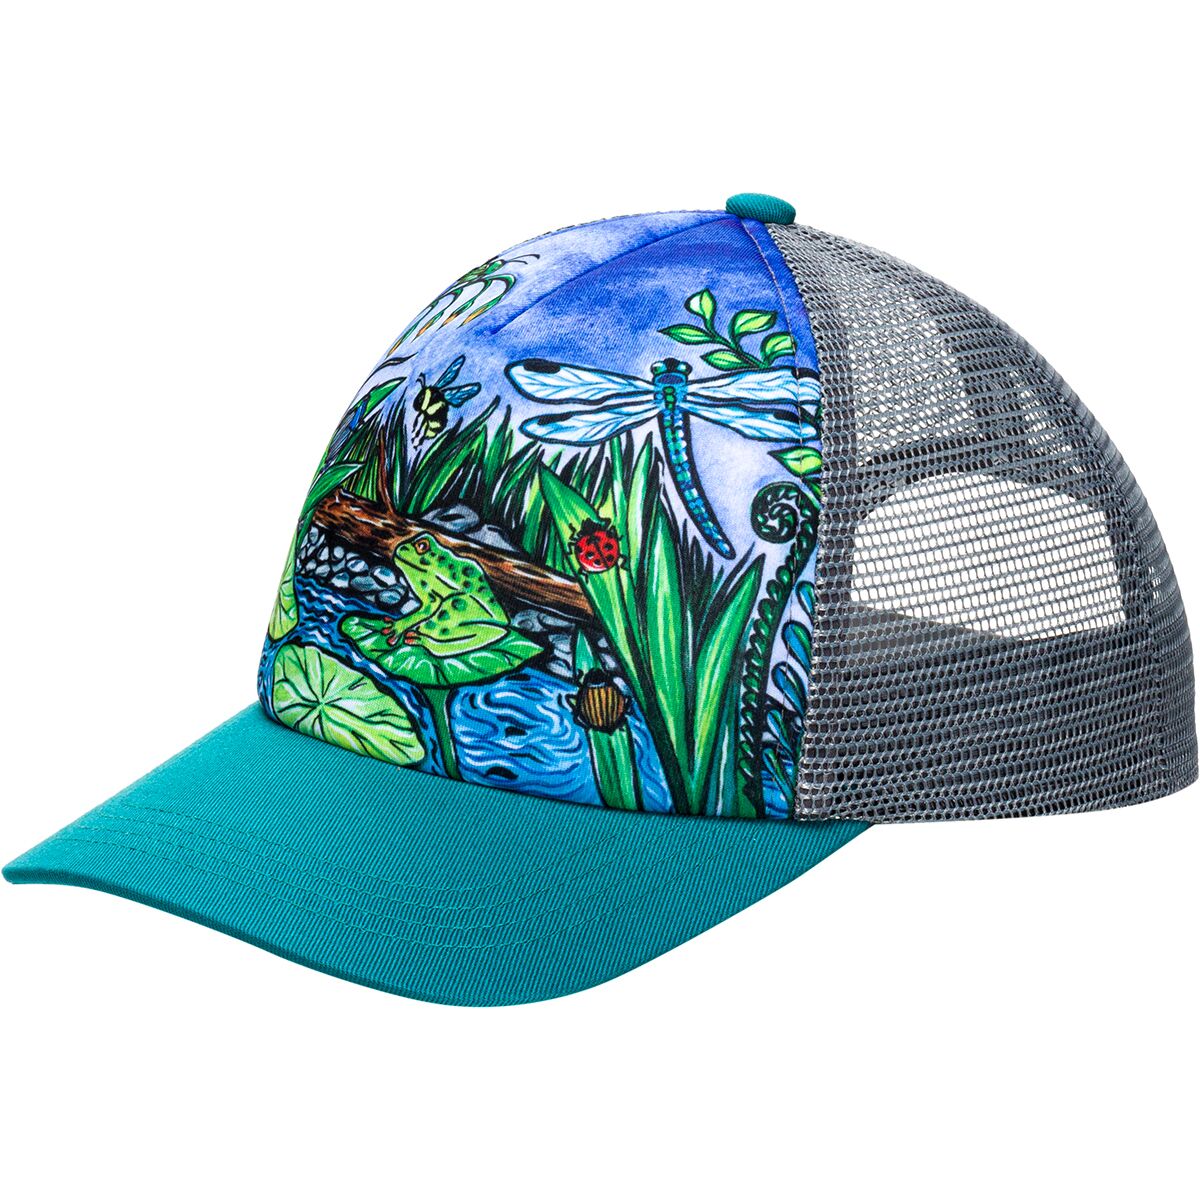 Sunday Afternoons Artist Series Cooling Trucker Hat - Kids'